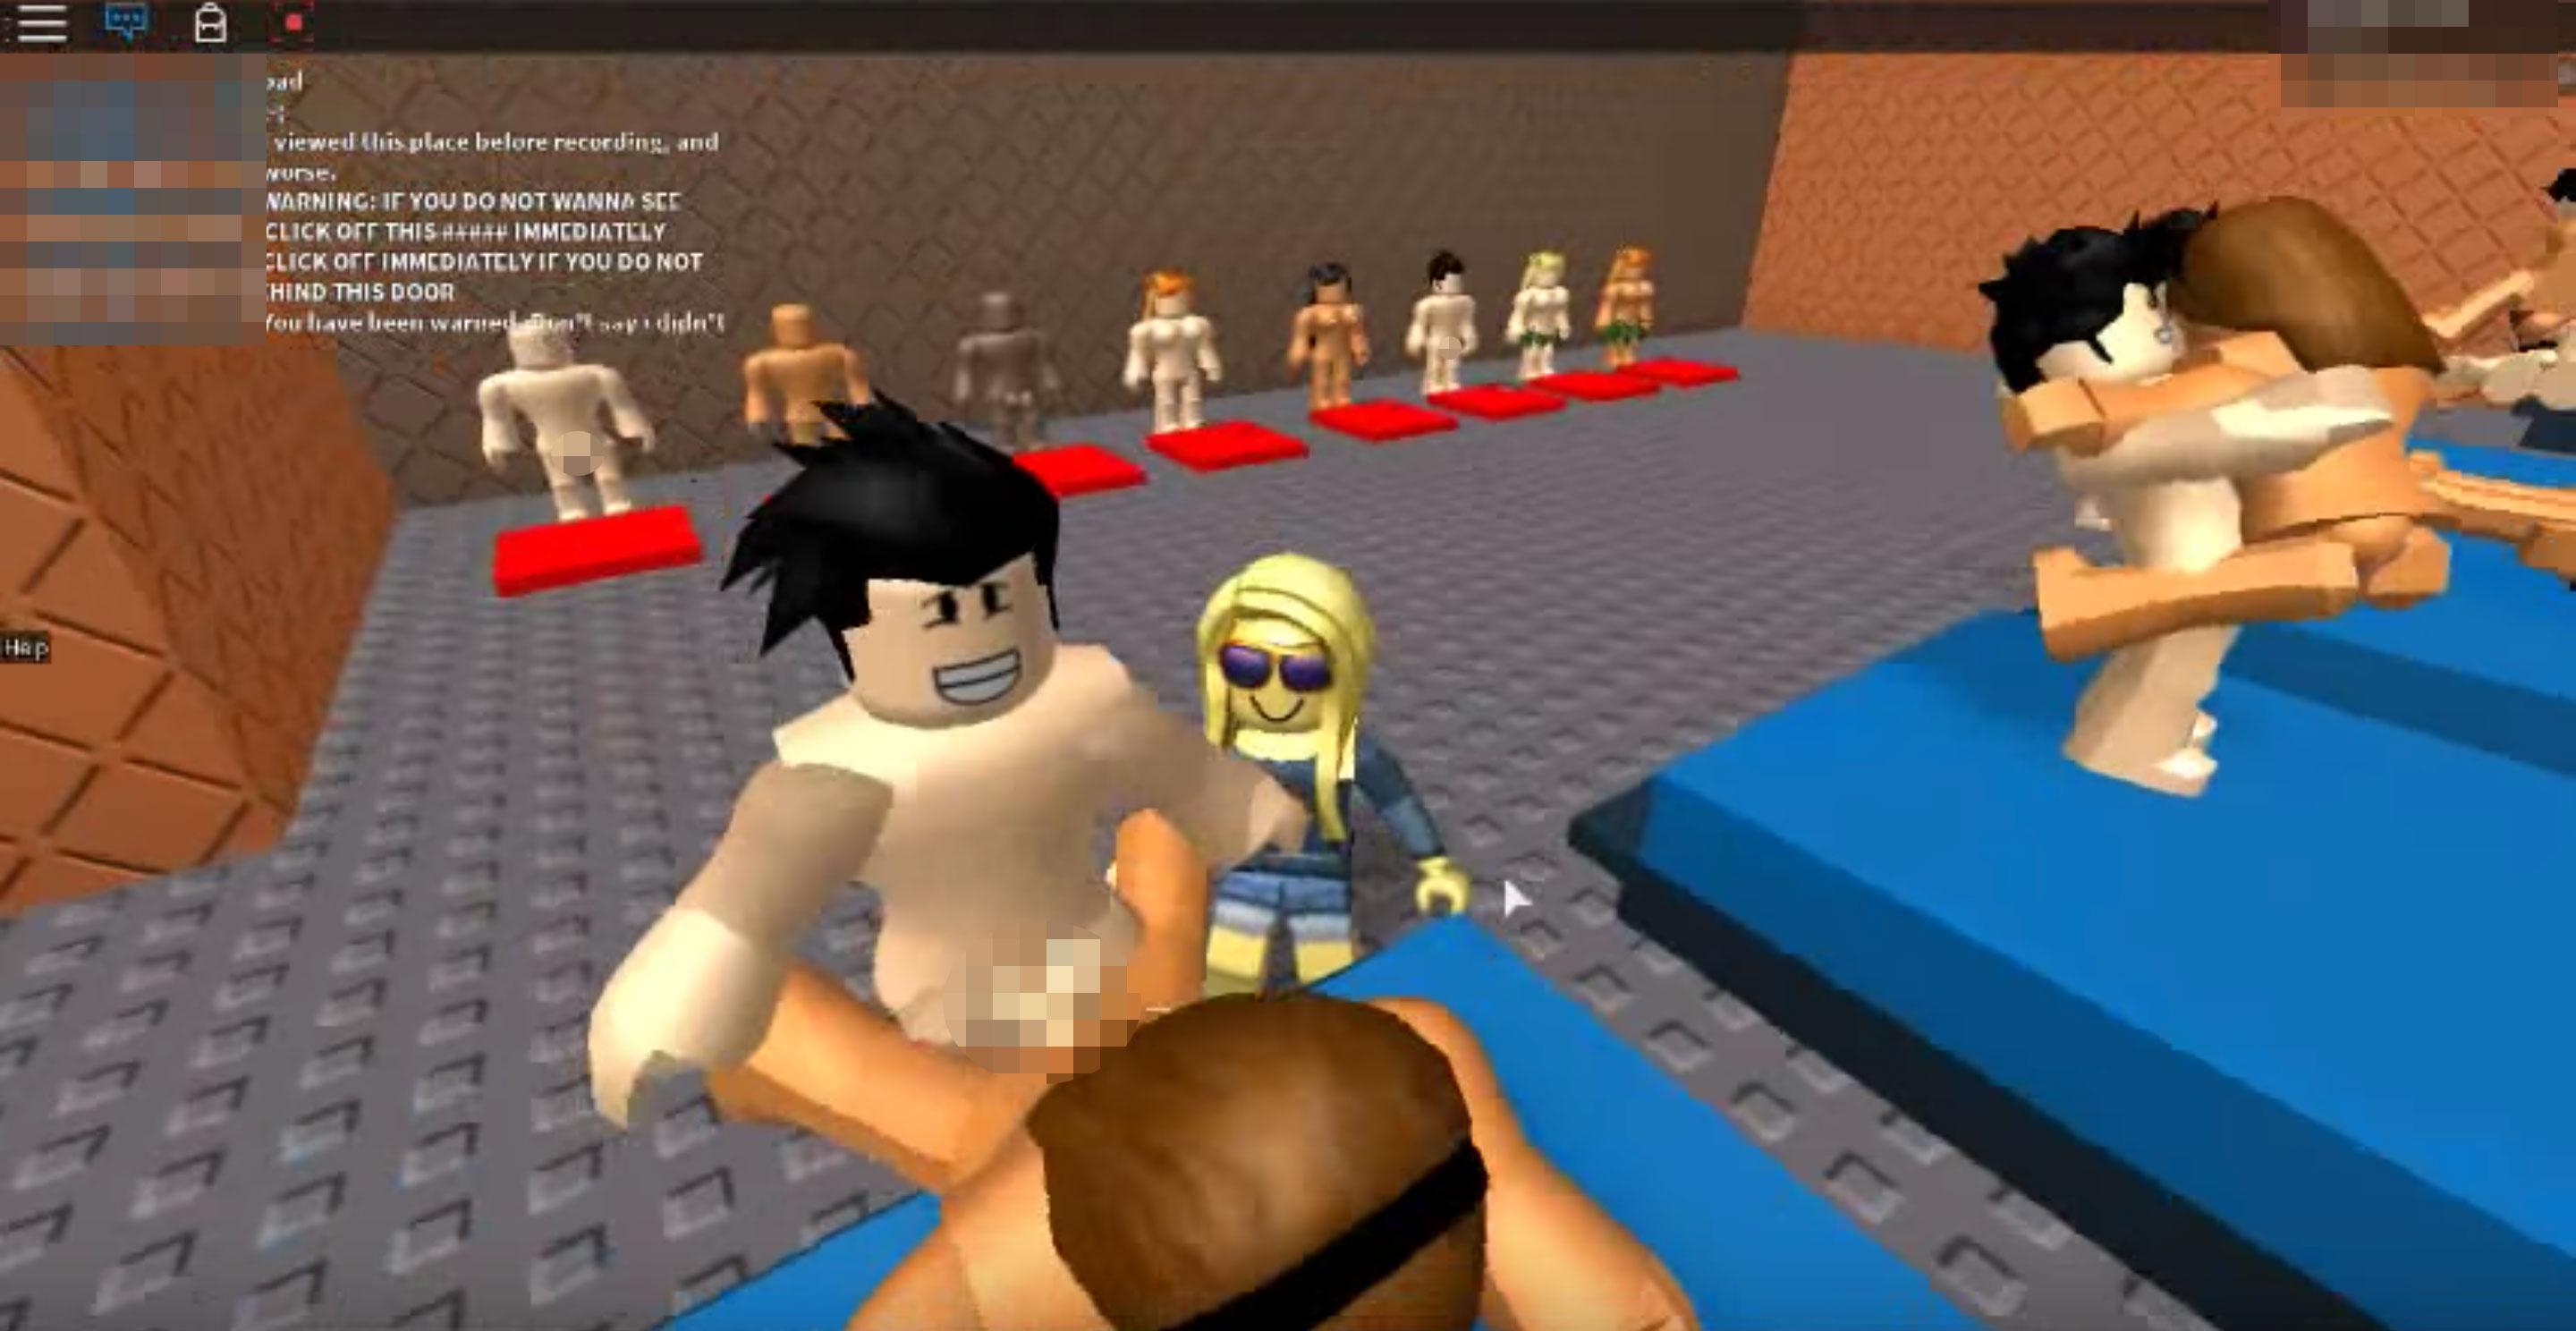 darren lees recommends people having sex in roblox pic